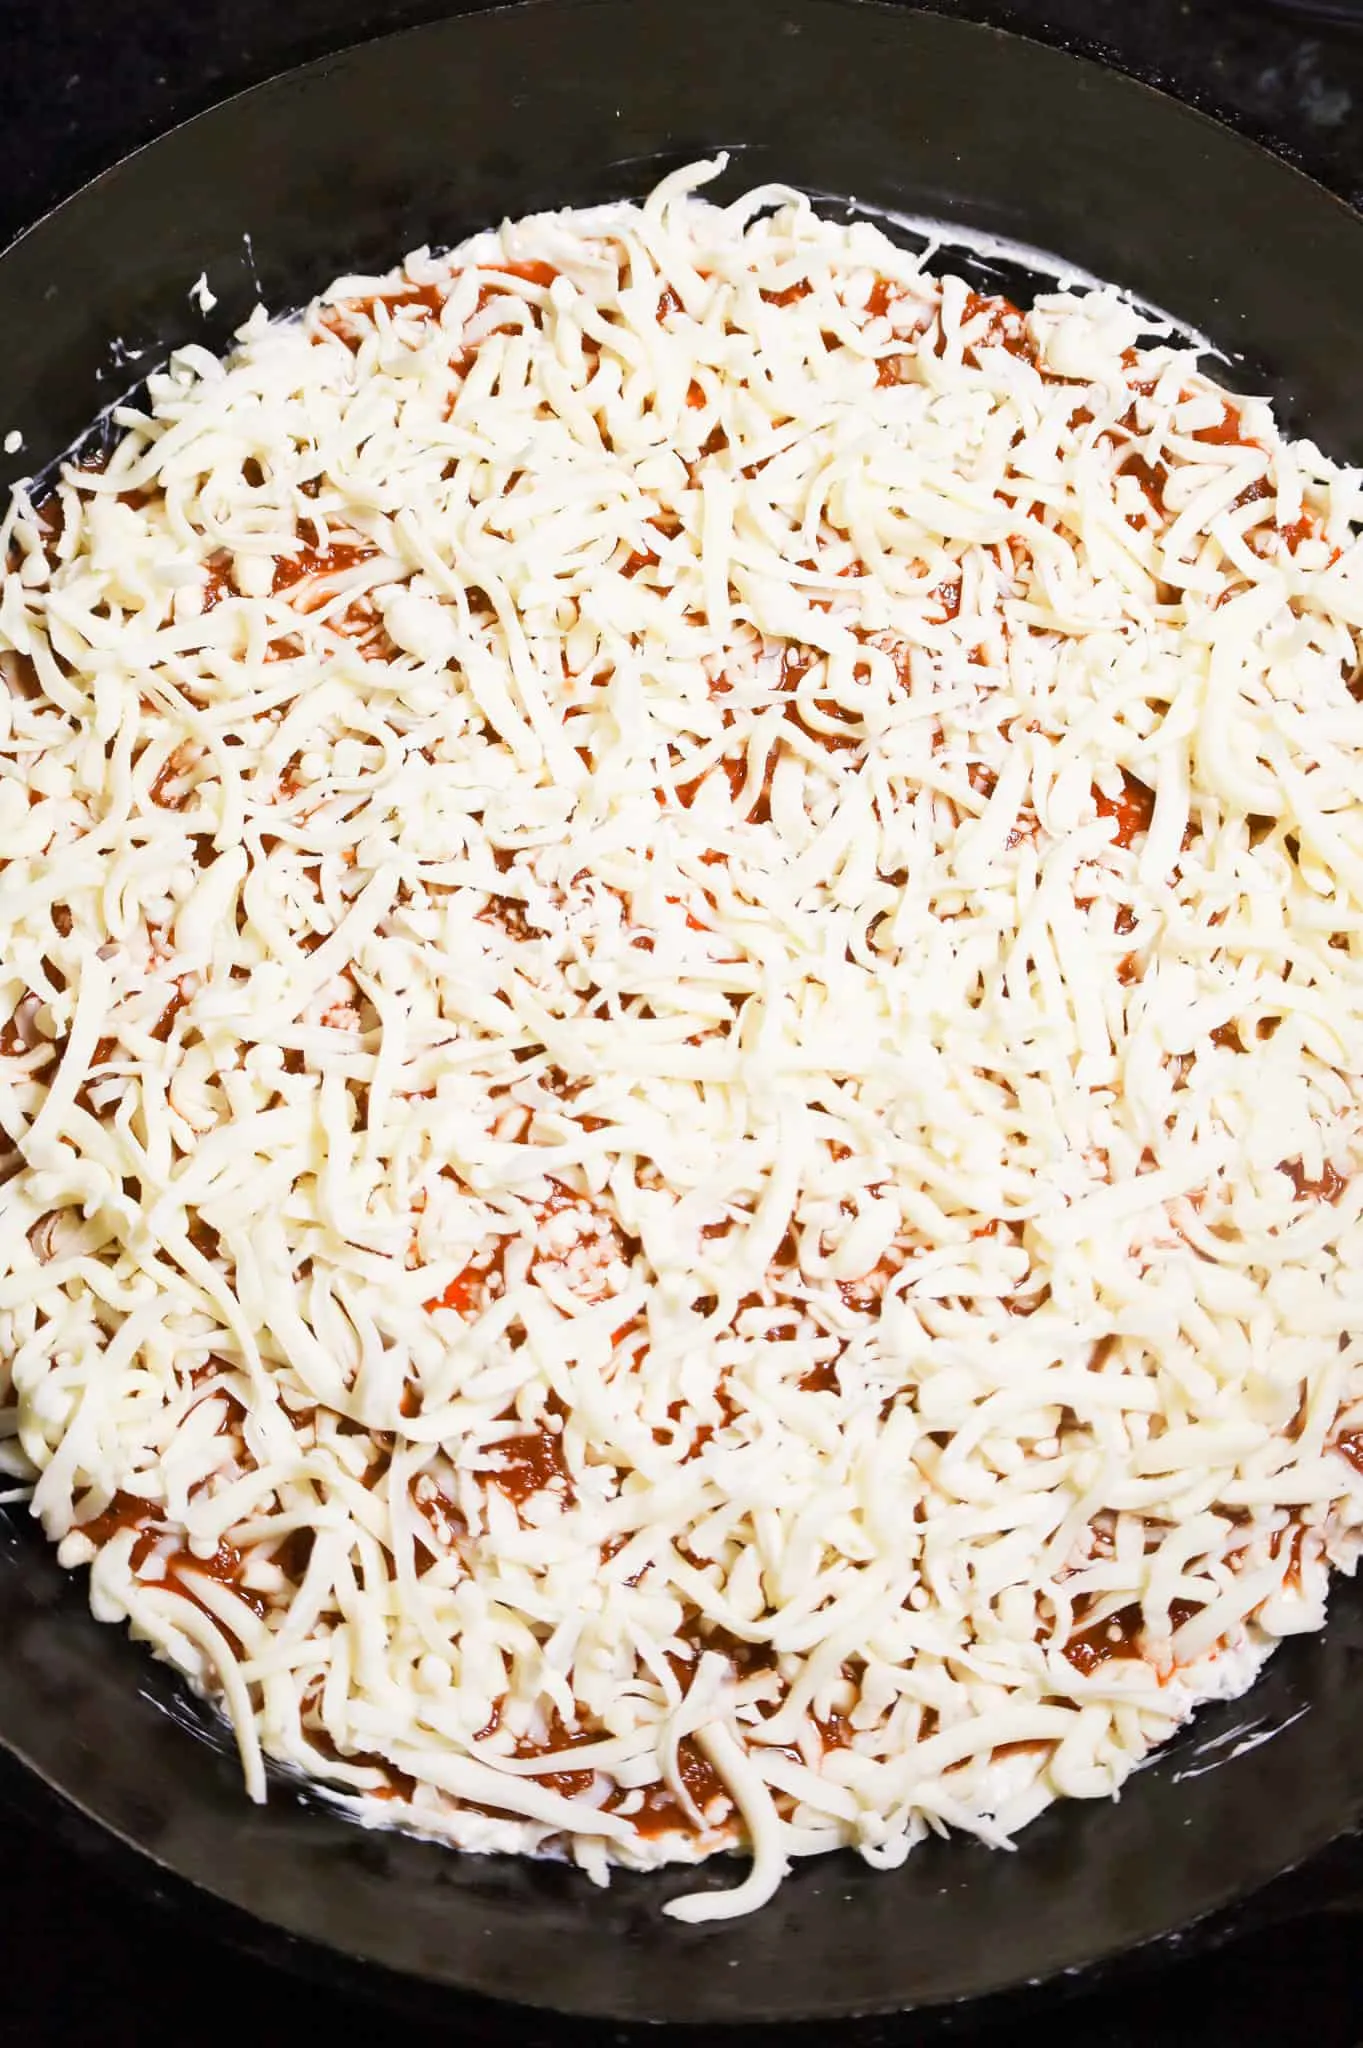 shredded mozzarella cheese on top of pizza sauce and cream cheese mixture in a skillet